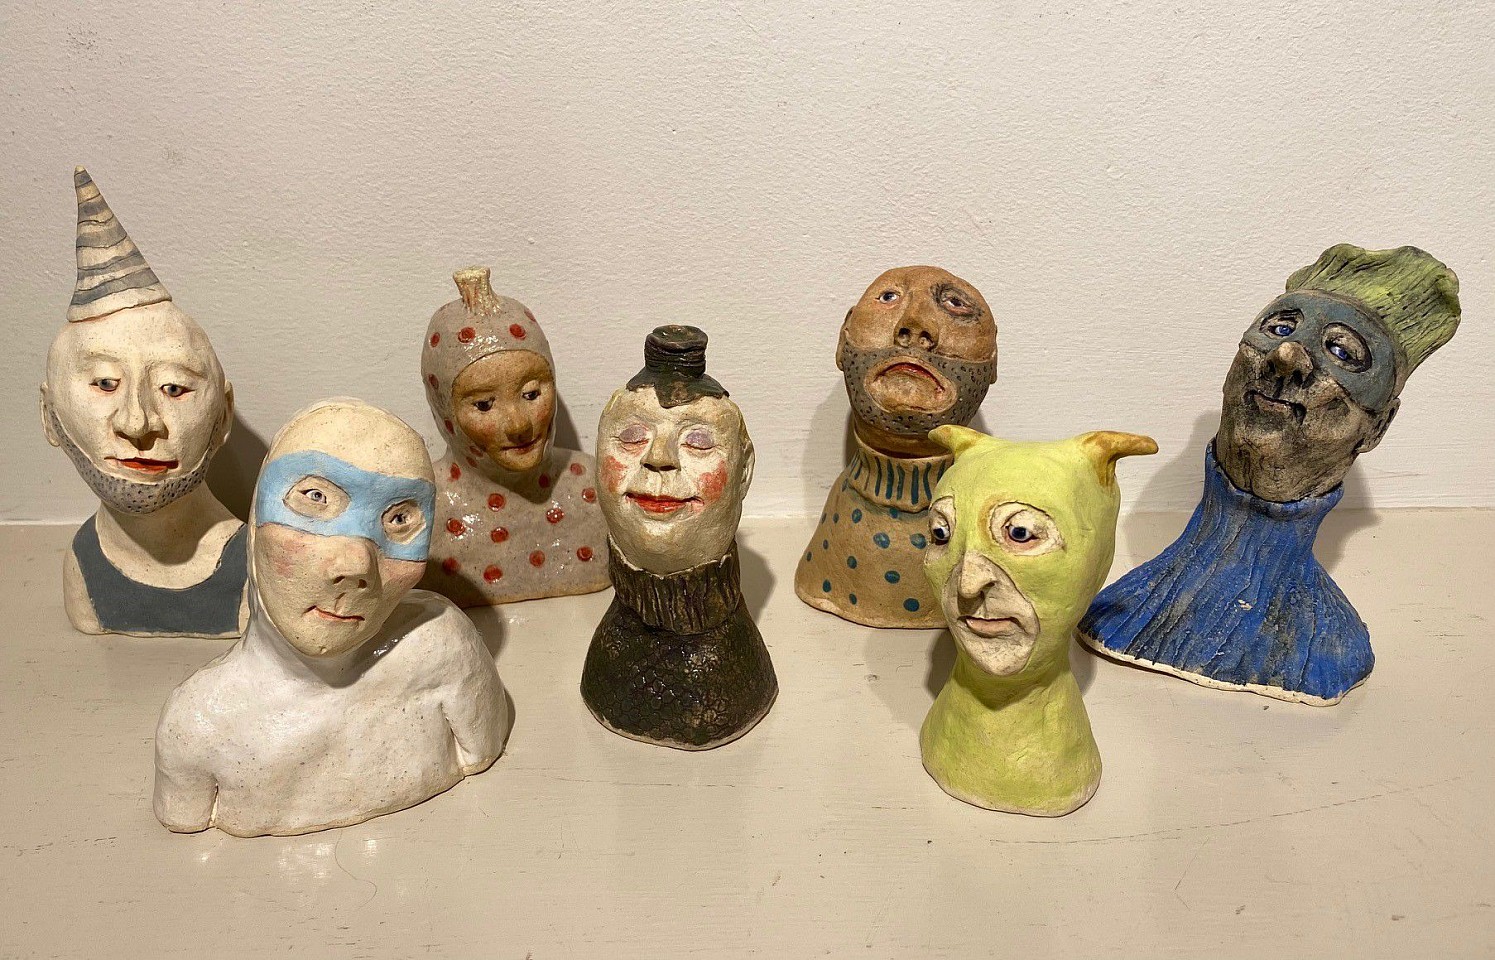 Jeanine Pennell, Characters Group 2
glazed ceramic, 4"" - 6""
JCAC 6292.02
$175